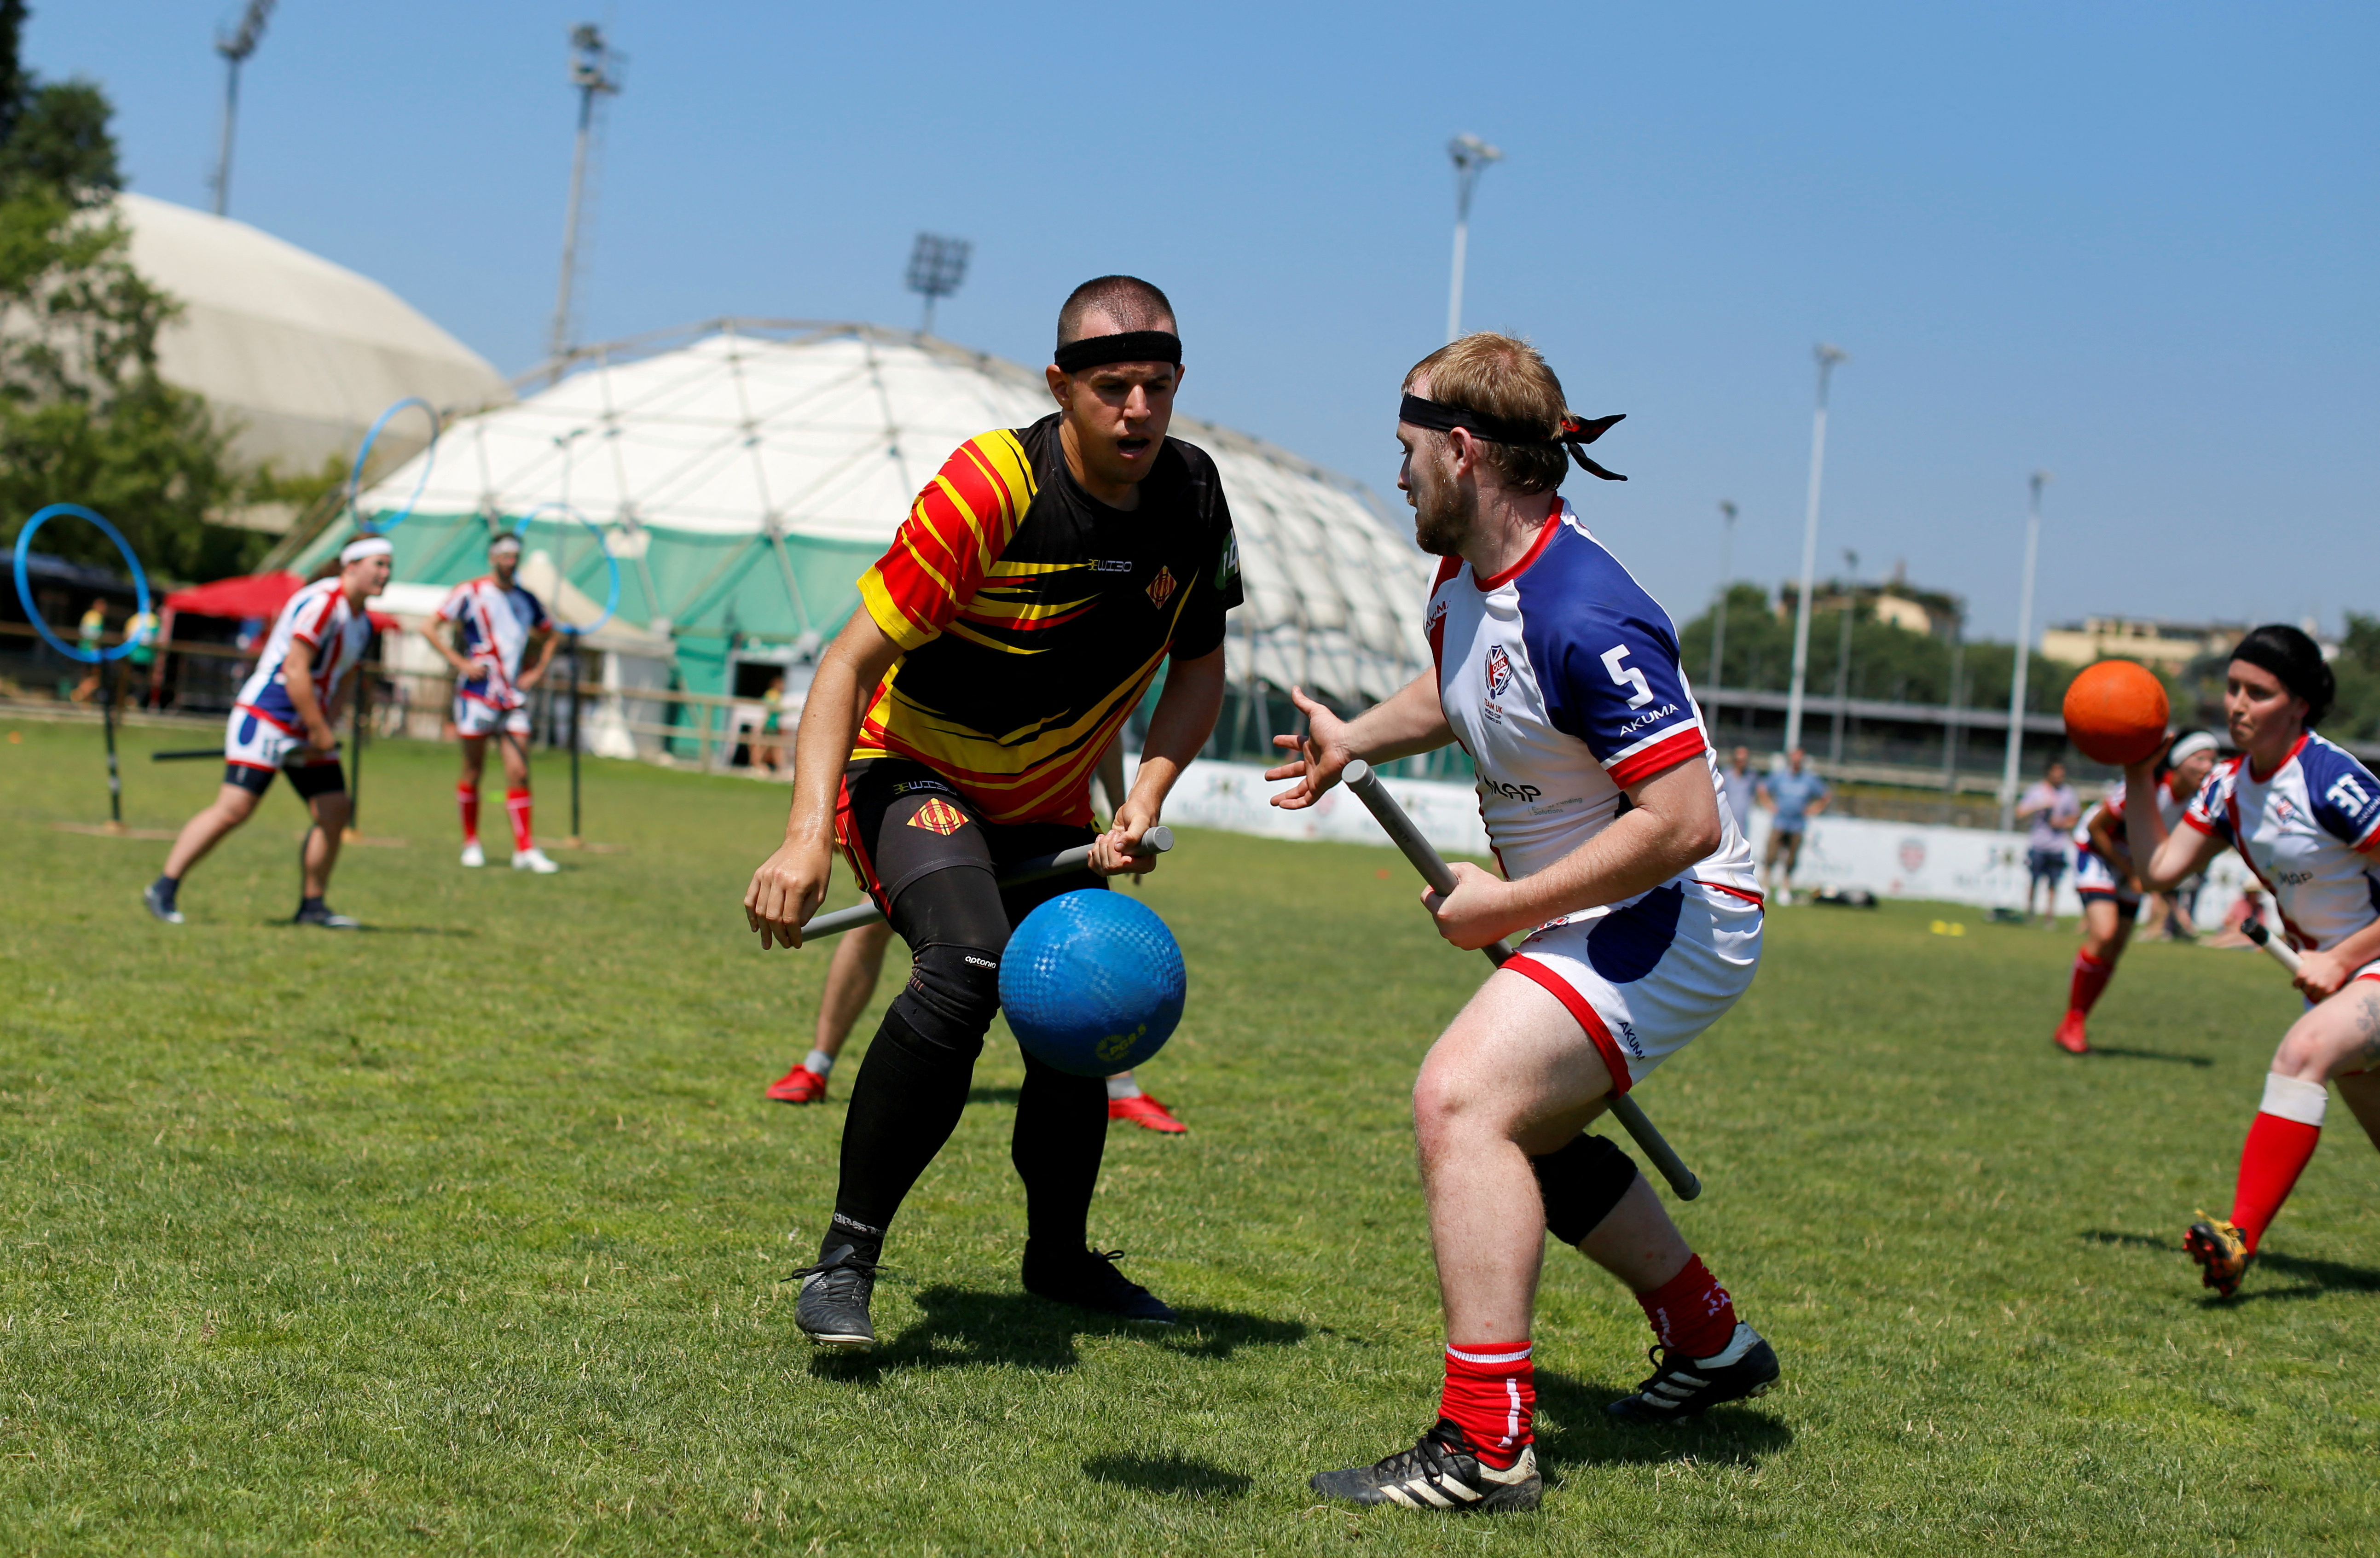 Britain and Catalonia teams compete in the second ever Quidditch World Cup in Florence, Italy